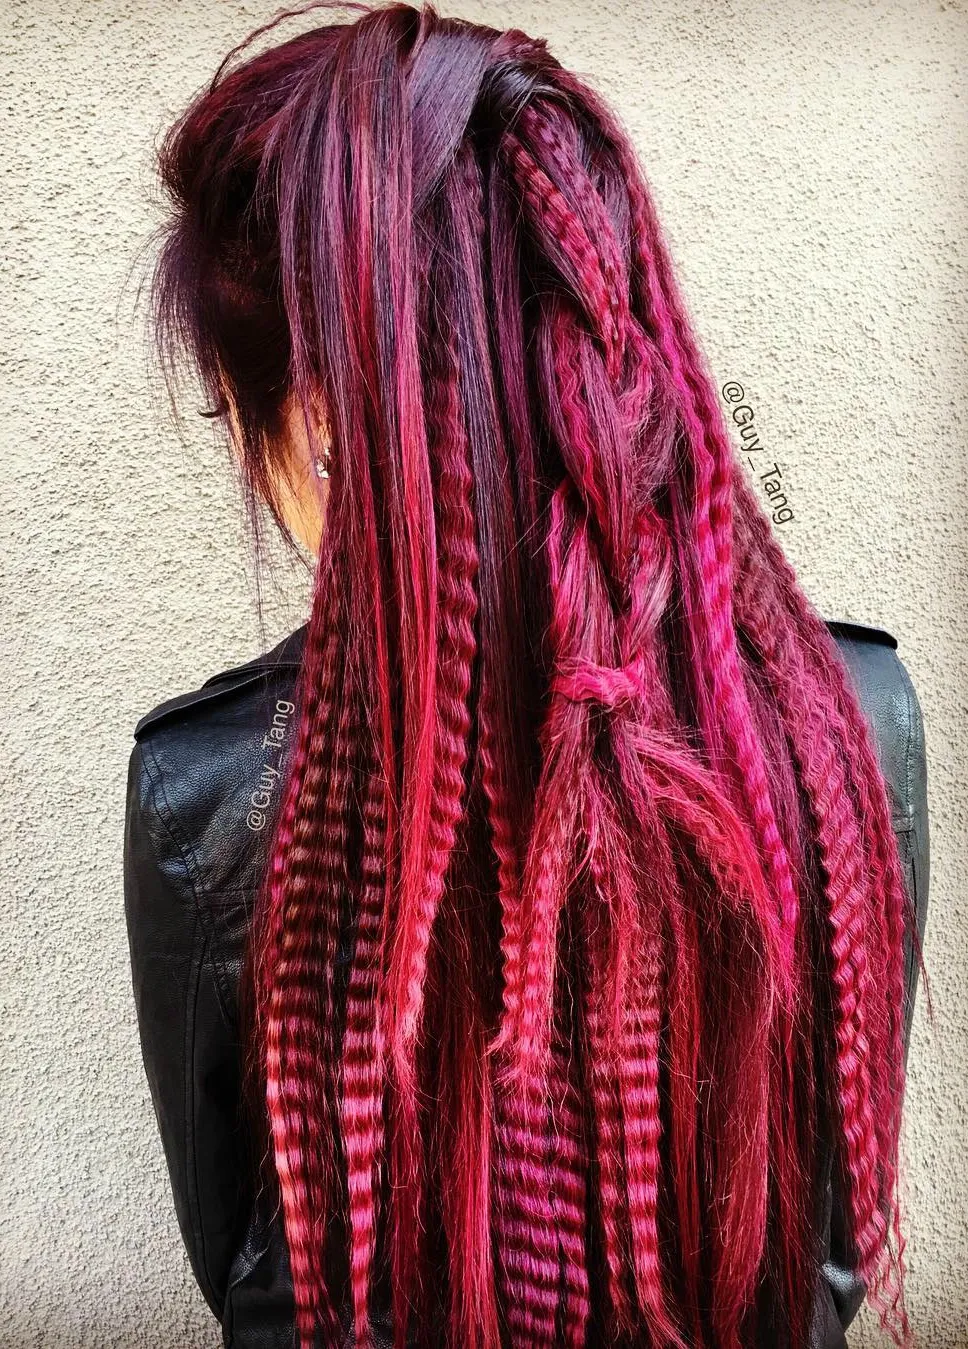 Back view of wine colored crimped and braided layers